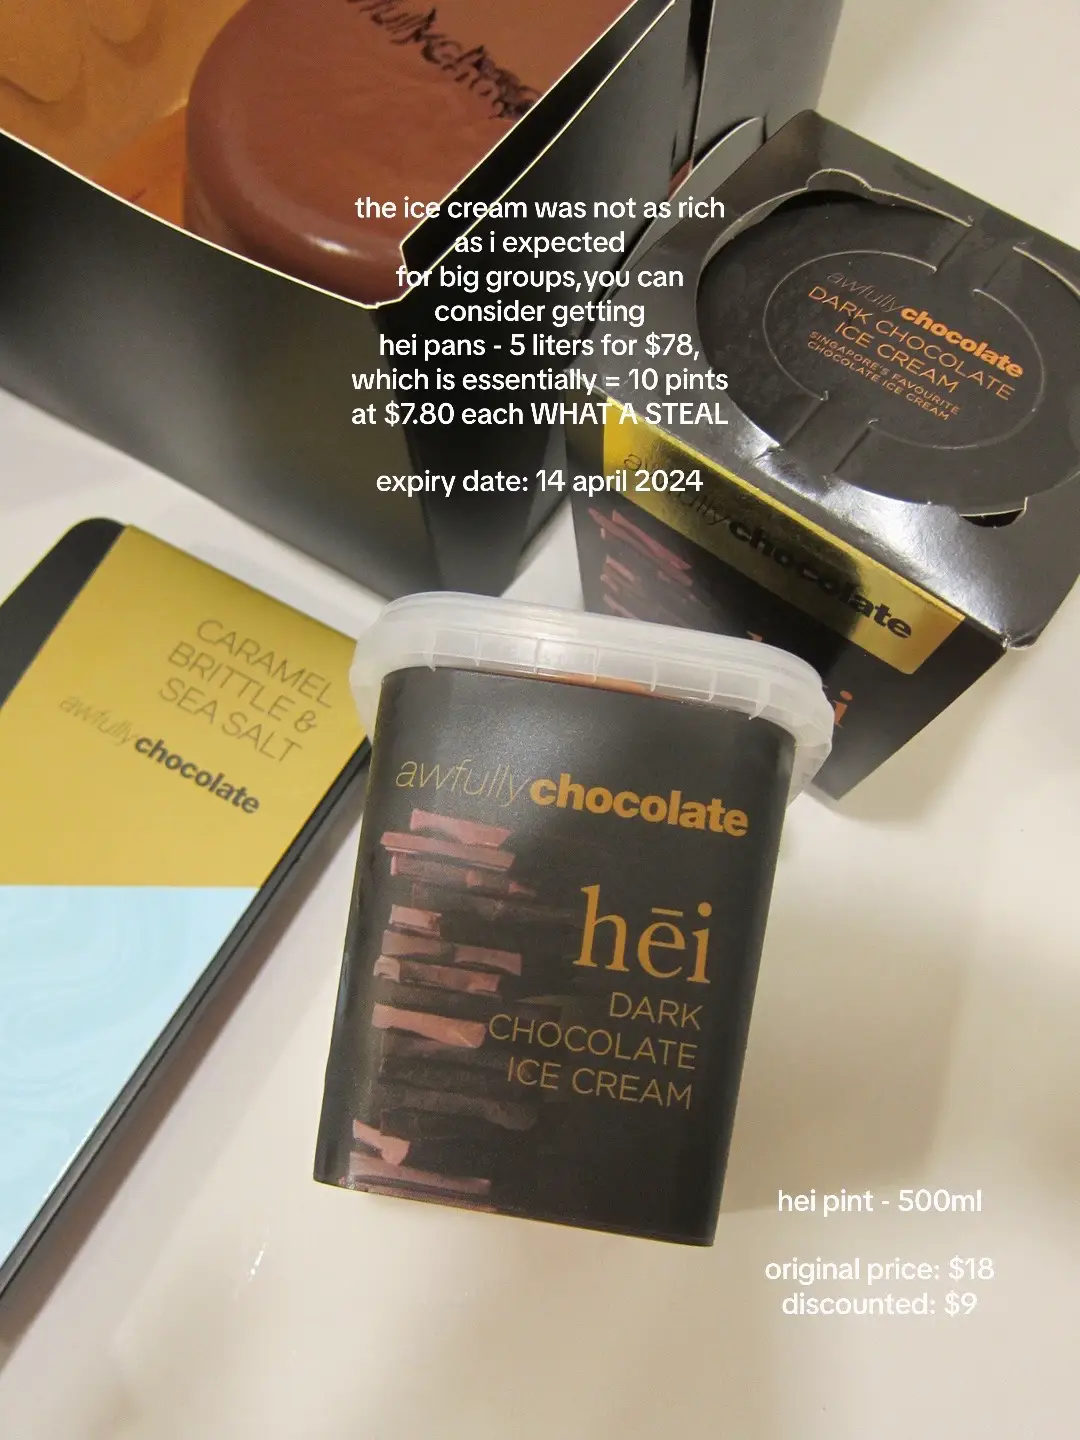 Exploring Different Chocolate Brands and Flavors - Lemon8 Search